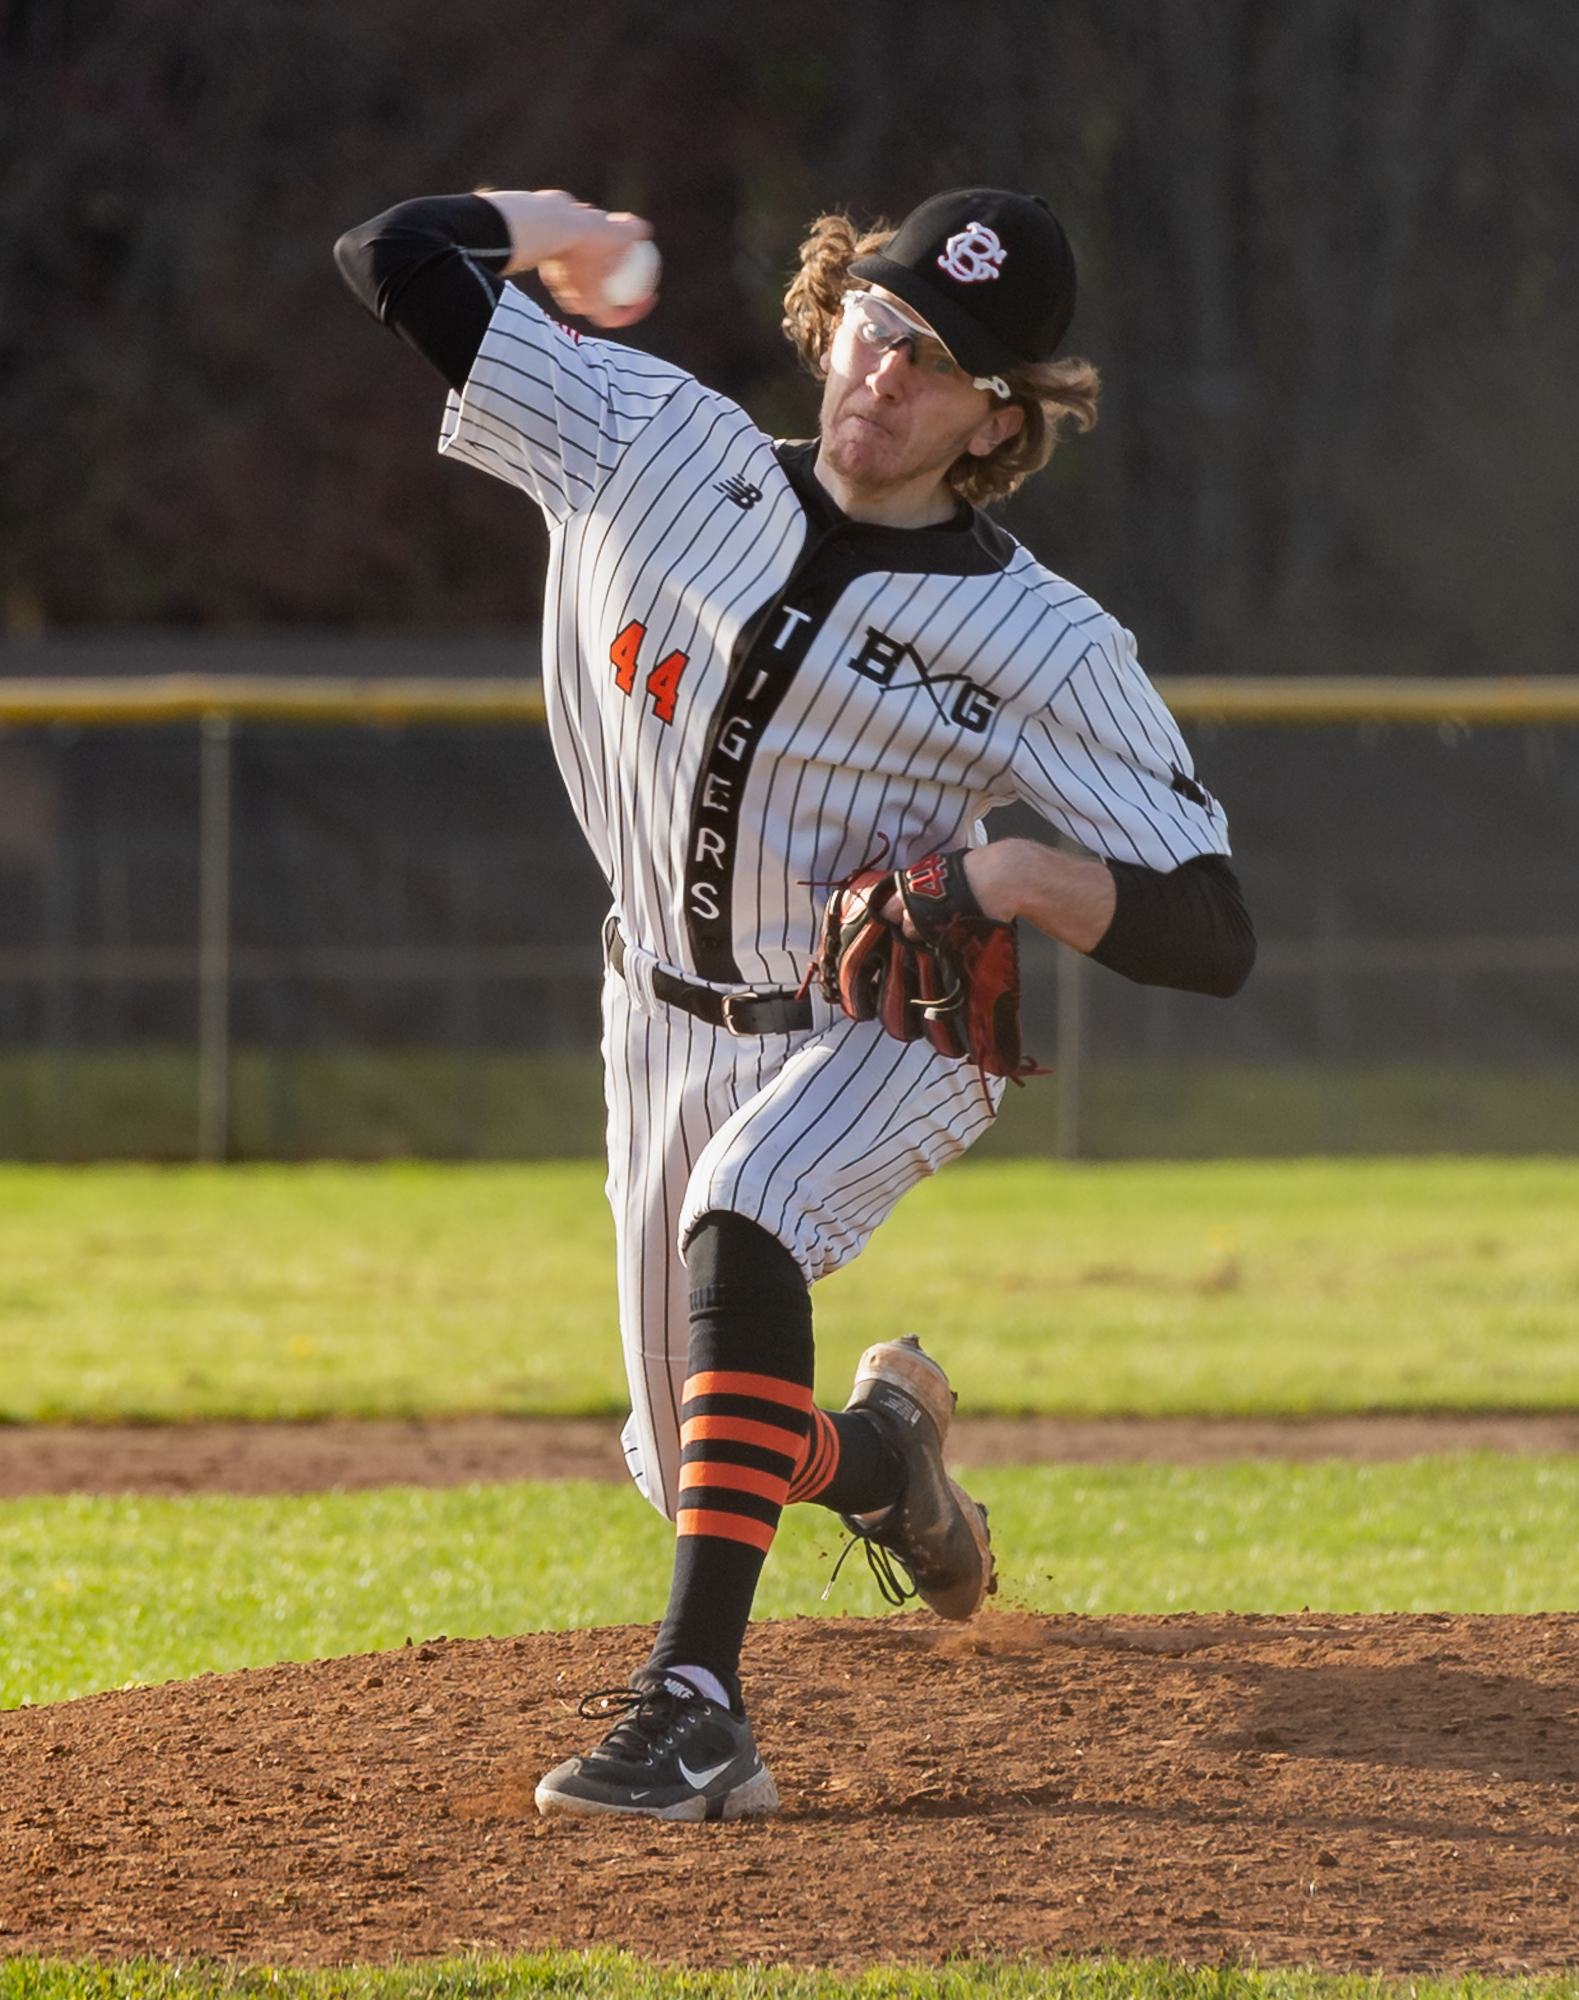 Battle Ground's Zach Hauser pitches in a 4A/3A Greater St. Helens League baseball game on Thursday, March 24, 2022, at Prairie High School. Battle Ground won 2-0.